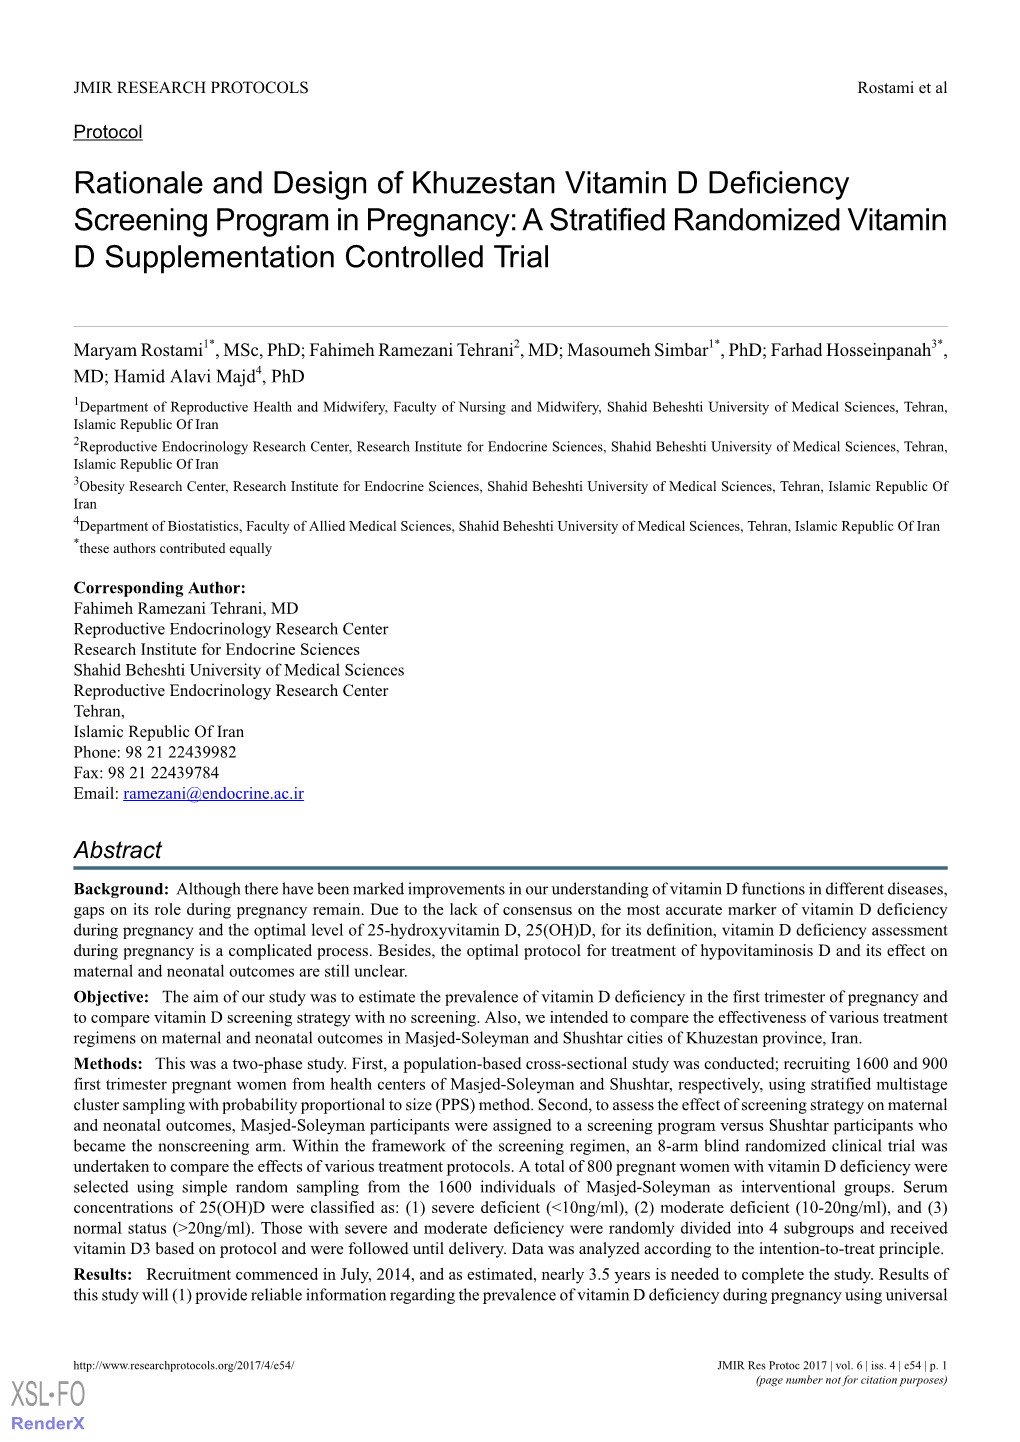 Rationale and Design of Khuzestan Vitamin D Deficiency Screening Program in Pregnancy: a Stratified Randomized Vitamin D Supplementation Controlled Trial